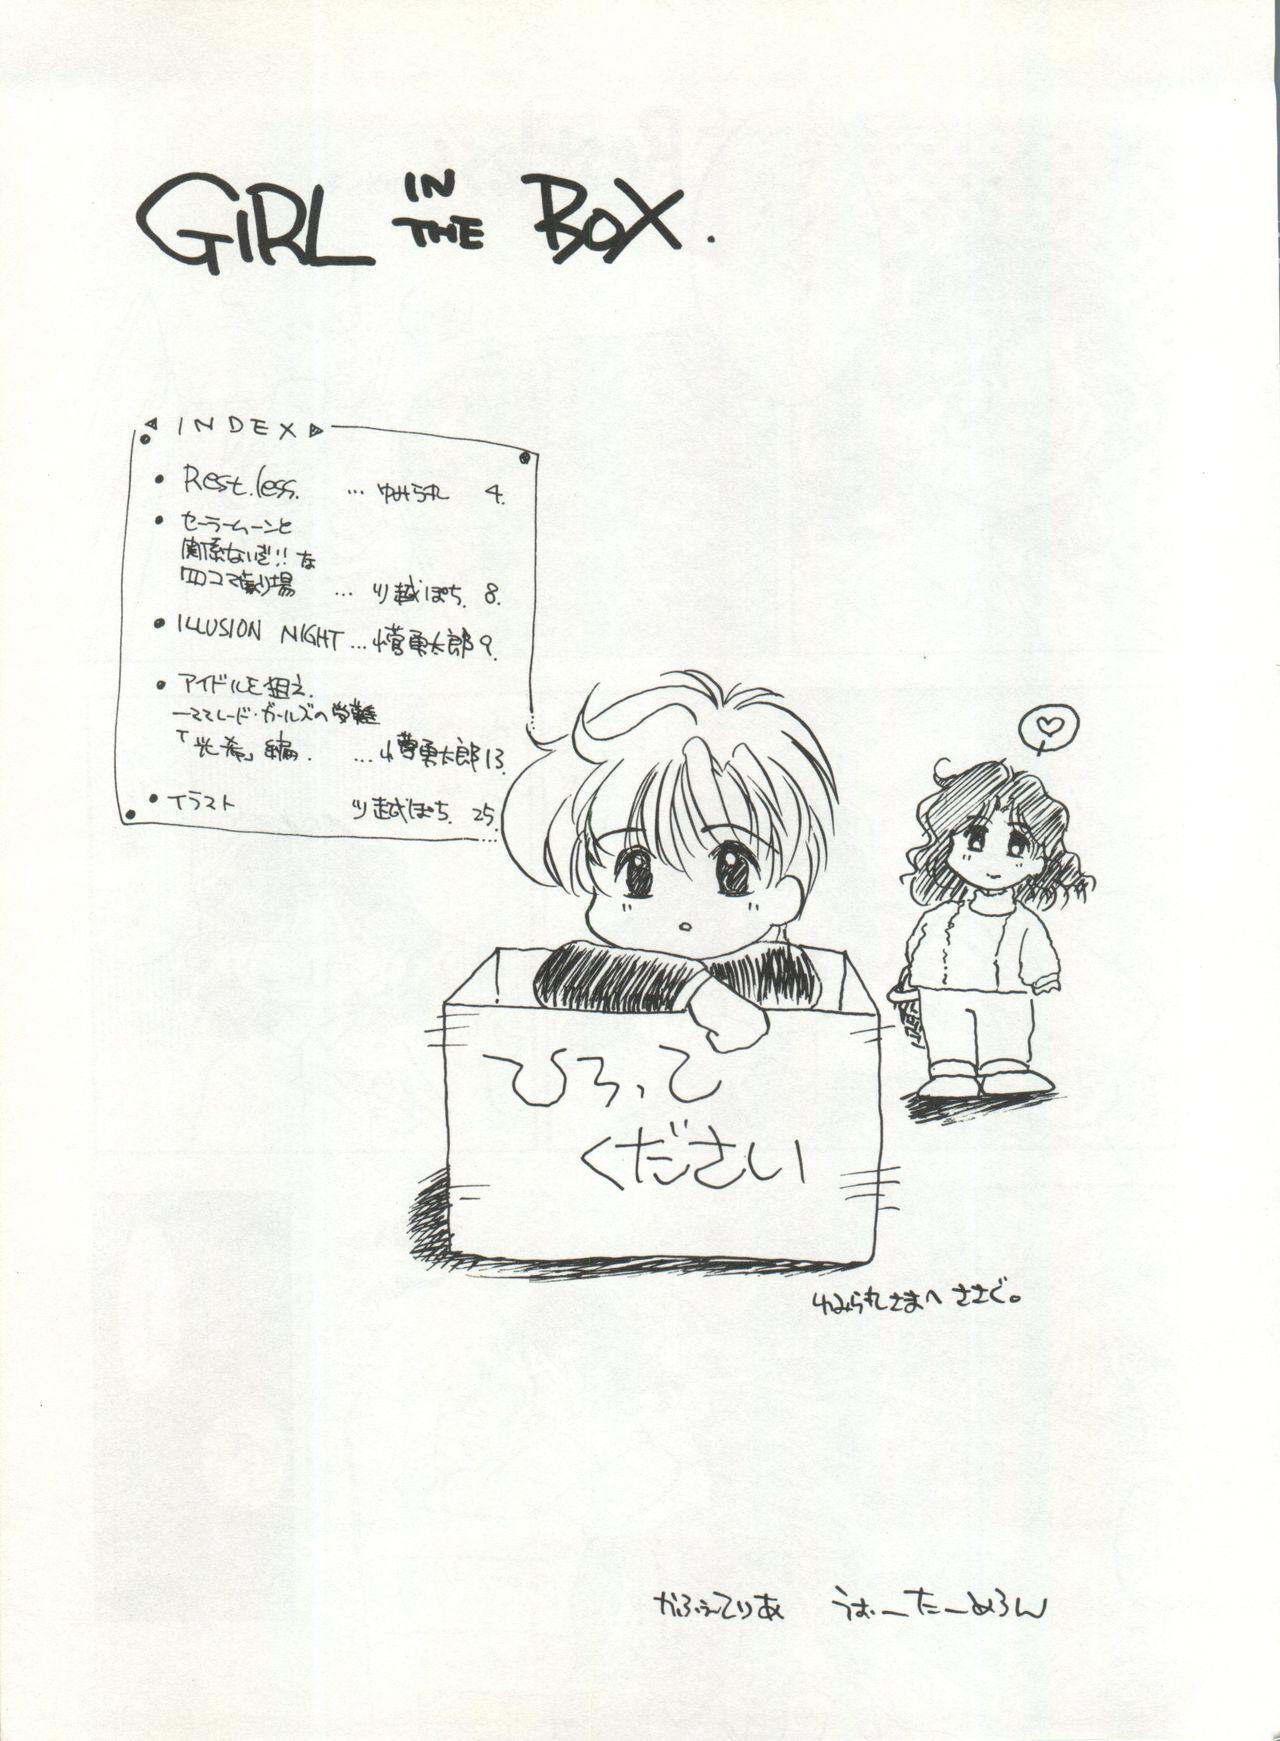 Fingers GIRL IN THE BOX - Marmalade boy Mexico - Page 3